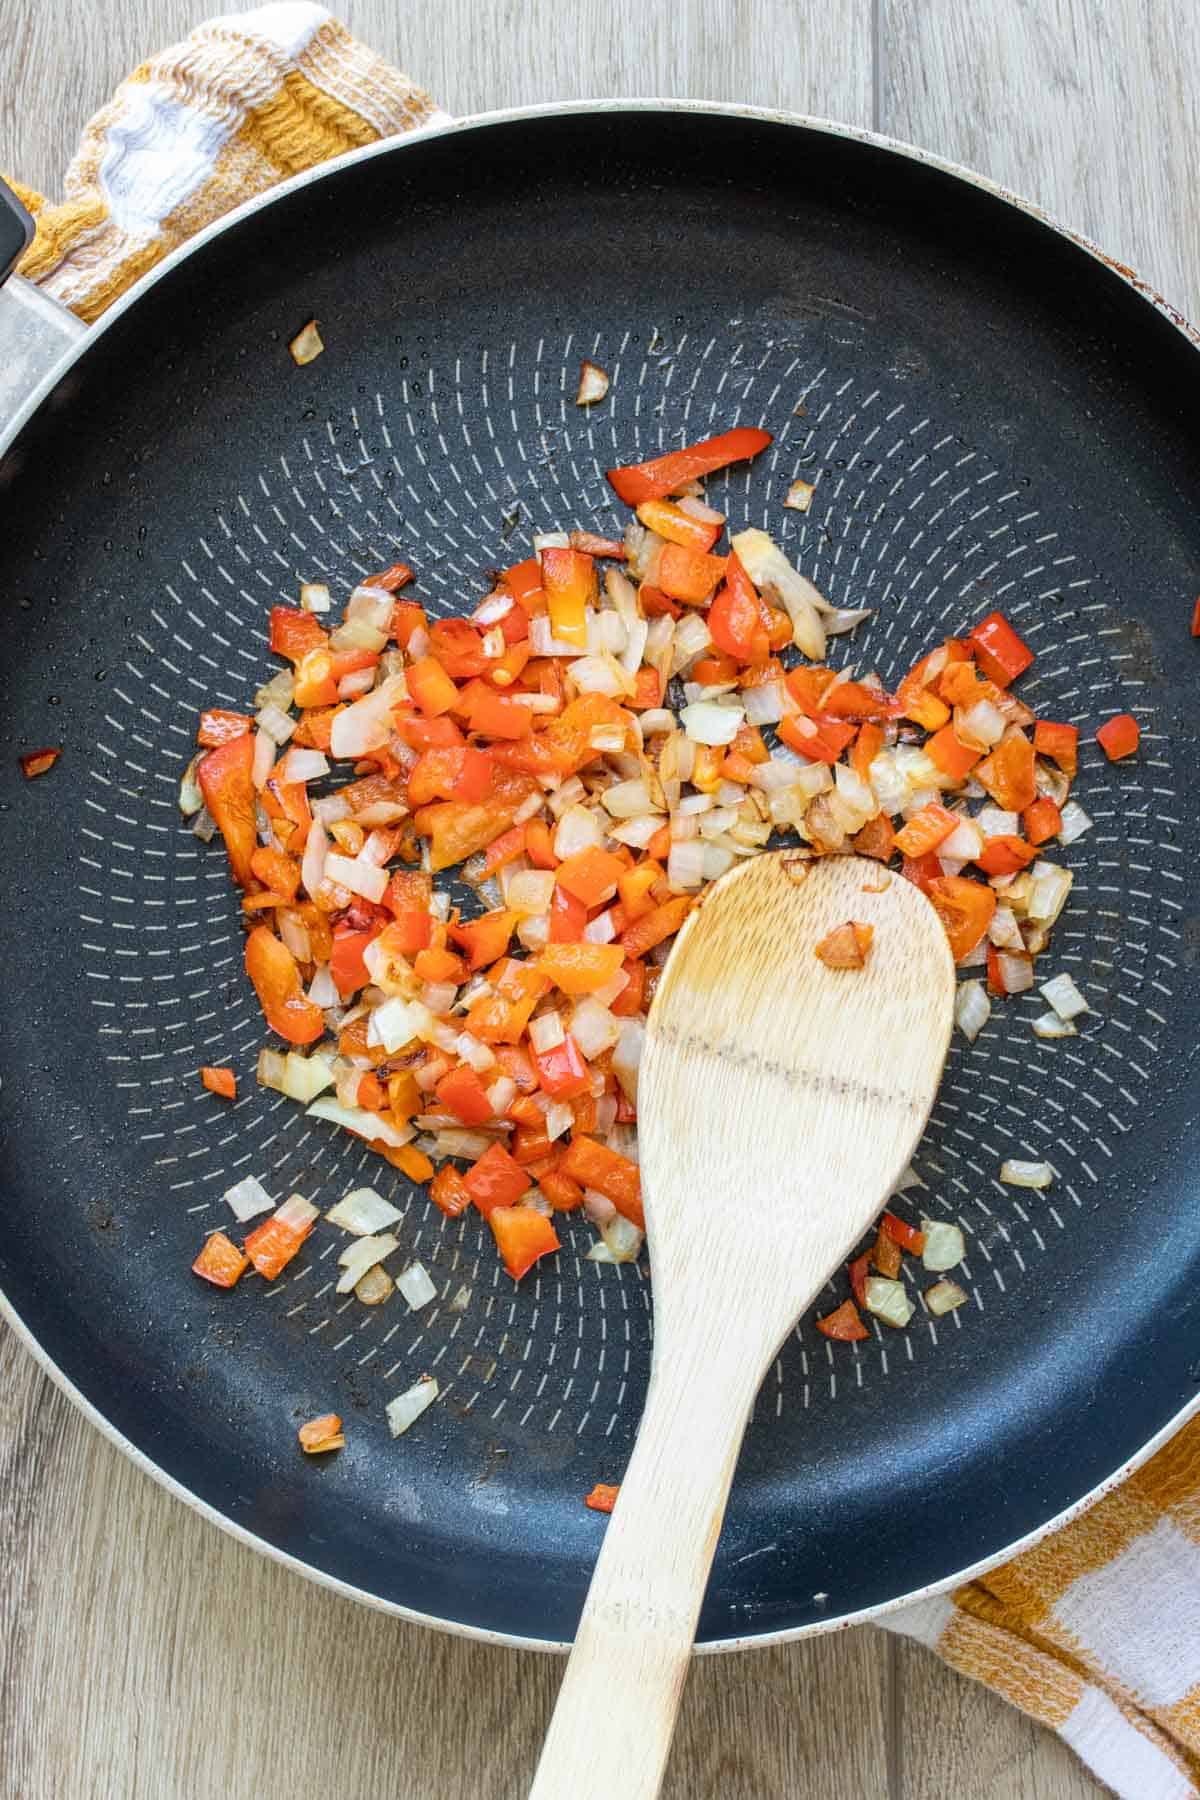 Red peppers and onions being sauteed in a pan with a wooden spoon